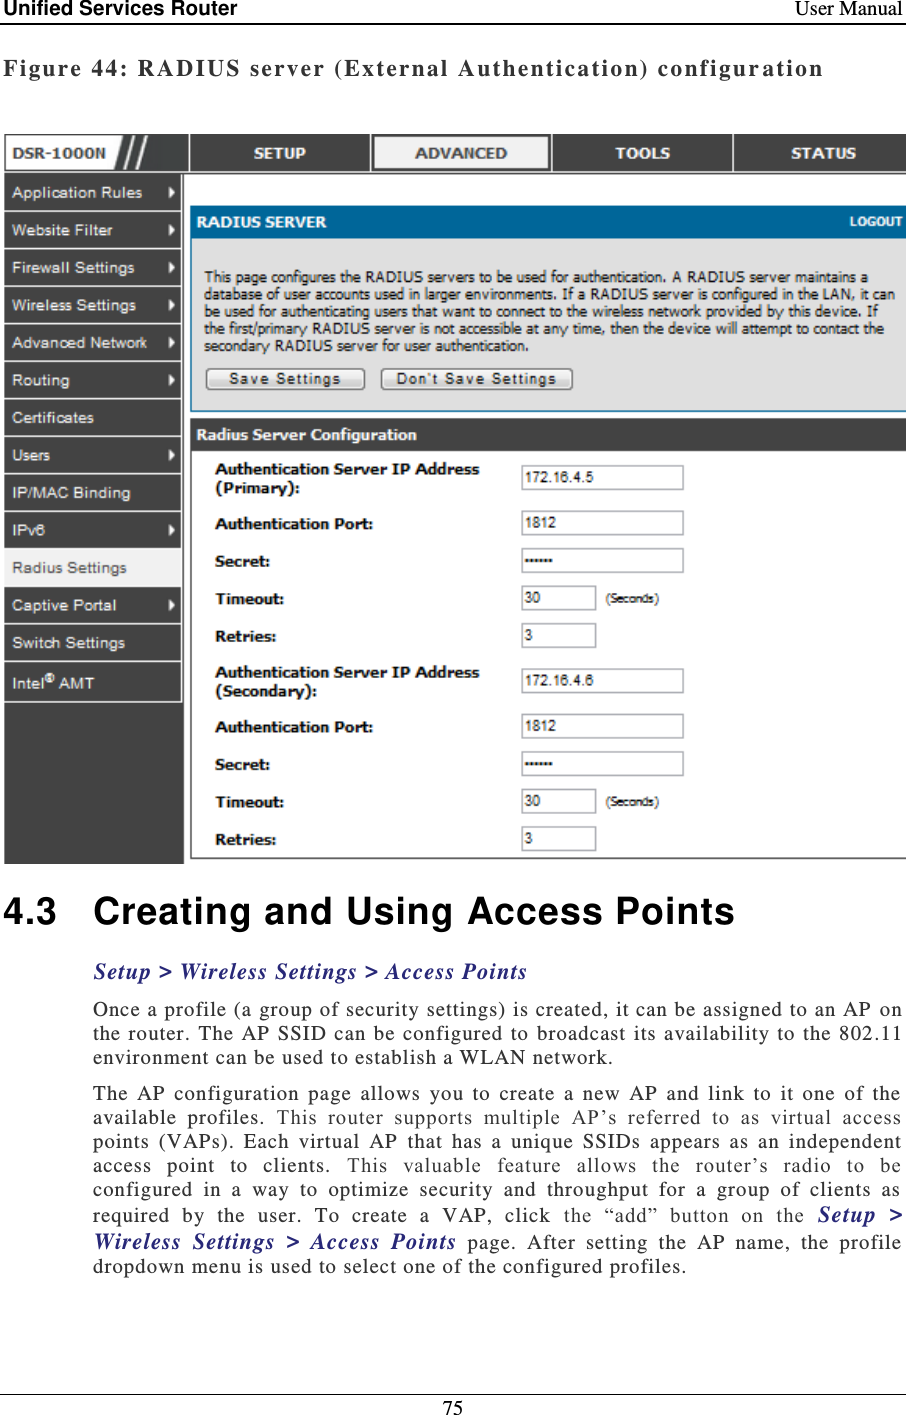 Unified Services Router    User Manual 75  Figure 44: RADIUS  server (External  Authentication) co nfigur ation   4.3  Creating and Using Access Points Setup &gt; Wireless Settings &gt; Access Points  Once a profile (a group of security settings) is created, it can be assigned to an AP  on the  router. The  AP  SSID  can  be  configured  to  broadcast its  availability to  the 802.11 environment can be used to establish a WLAN network.  The  AP  configuration  page  allows  you  to  create  a  new  AP  and  link  to  it  one  of  the available  profiles.  This  router  supports  multiple  AP’s  referred  to  as  virtual  access points  (VAPs).  Each  virtual  AP  that  has  a  unique  SSIDs  appears  as  an  independent access  point  to  clients.  This  valuable  feature  allows  the  router’s  radio  to  be configured  in  a  way  to  optimize  security  and  throughput  for  a  group  of  clients  as required  by  the  user.  To  create  a  VAP,  click  the  “add”  button  on  the  Setup  &gt; Wireless  Settings  &gt;  Access  Points  page.  After  setting  the  AP  name,  the  profile dropdown menu is used to select one of the configured profiles.   